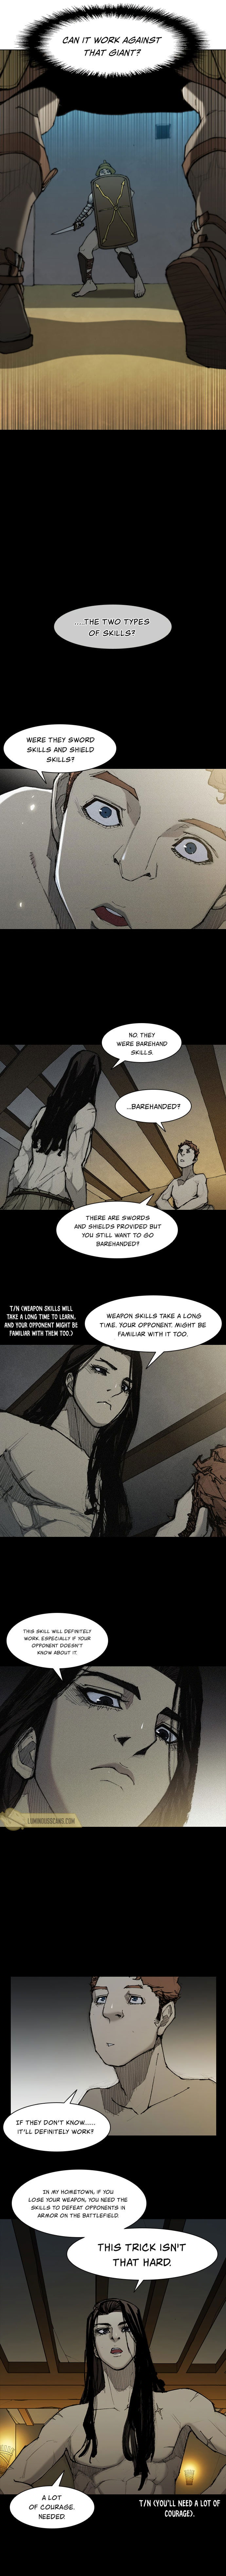 long-way-of-the-warrior-chap-28-7